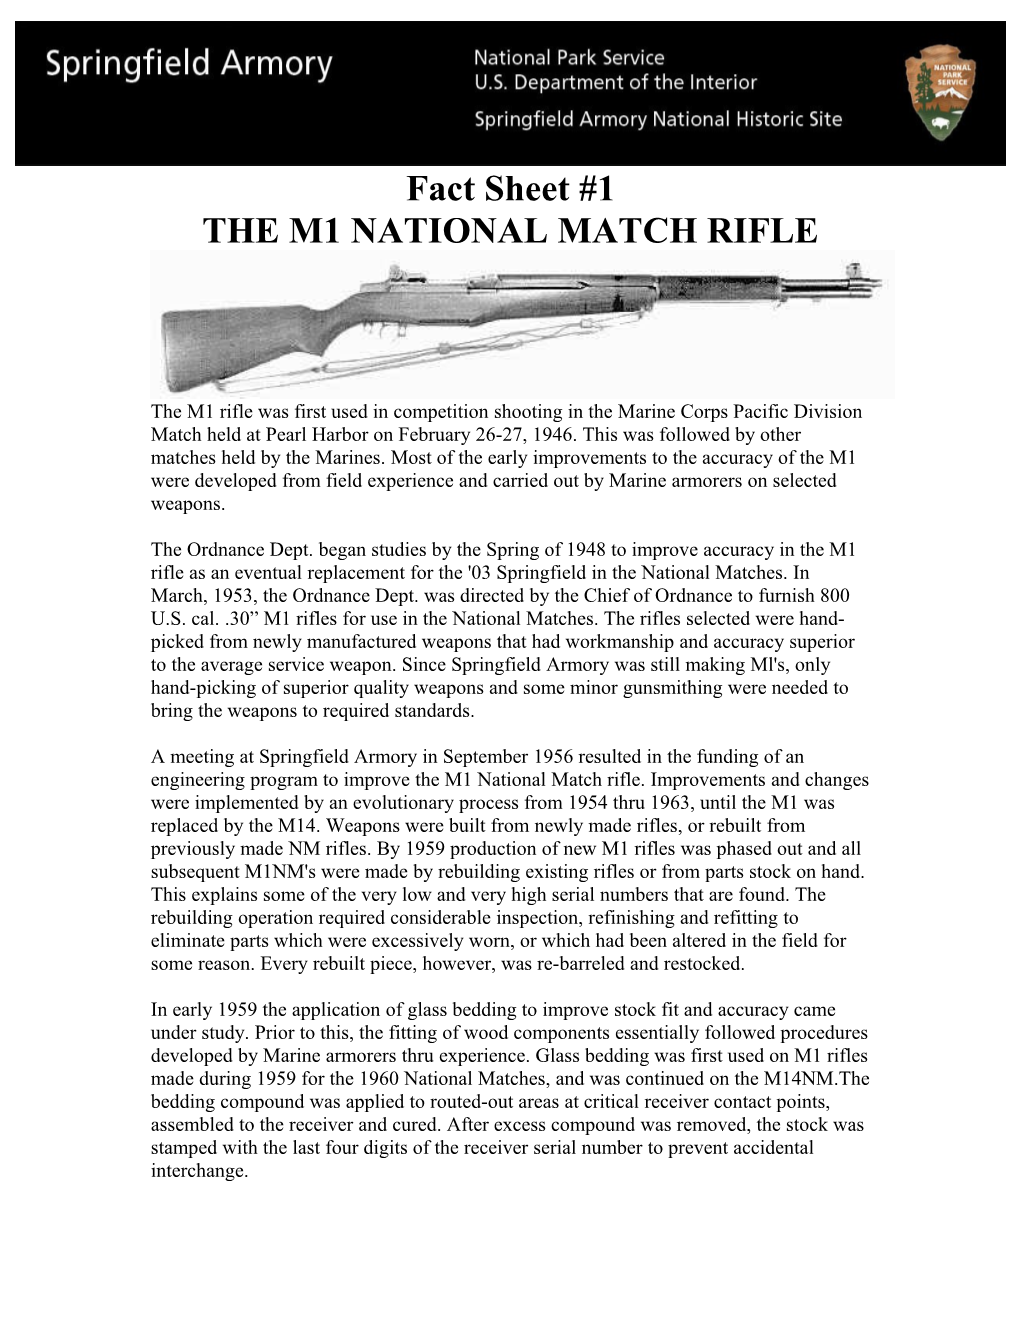 The M1 National Match Rifle